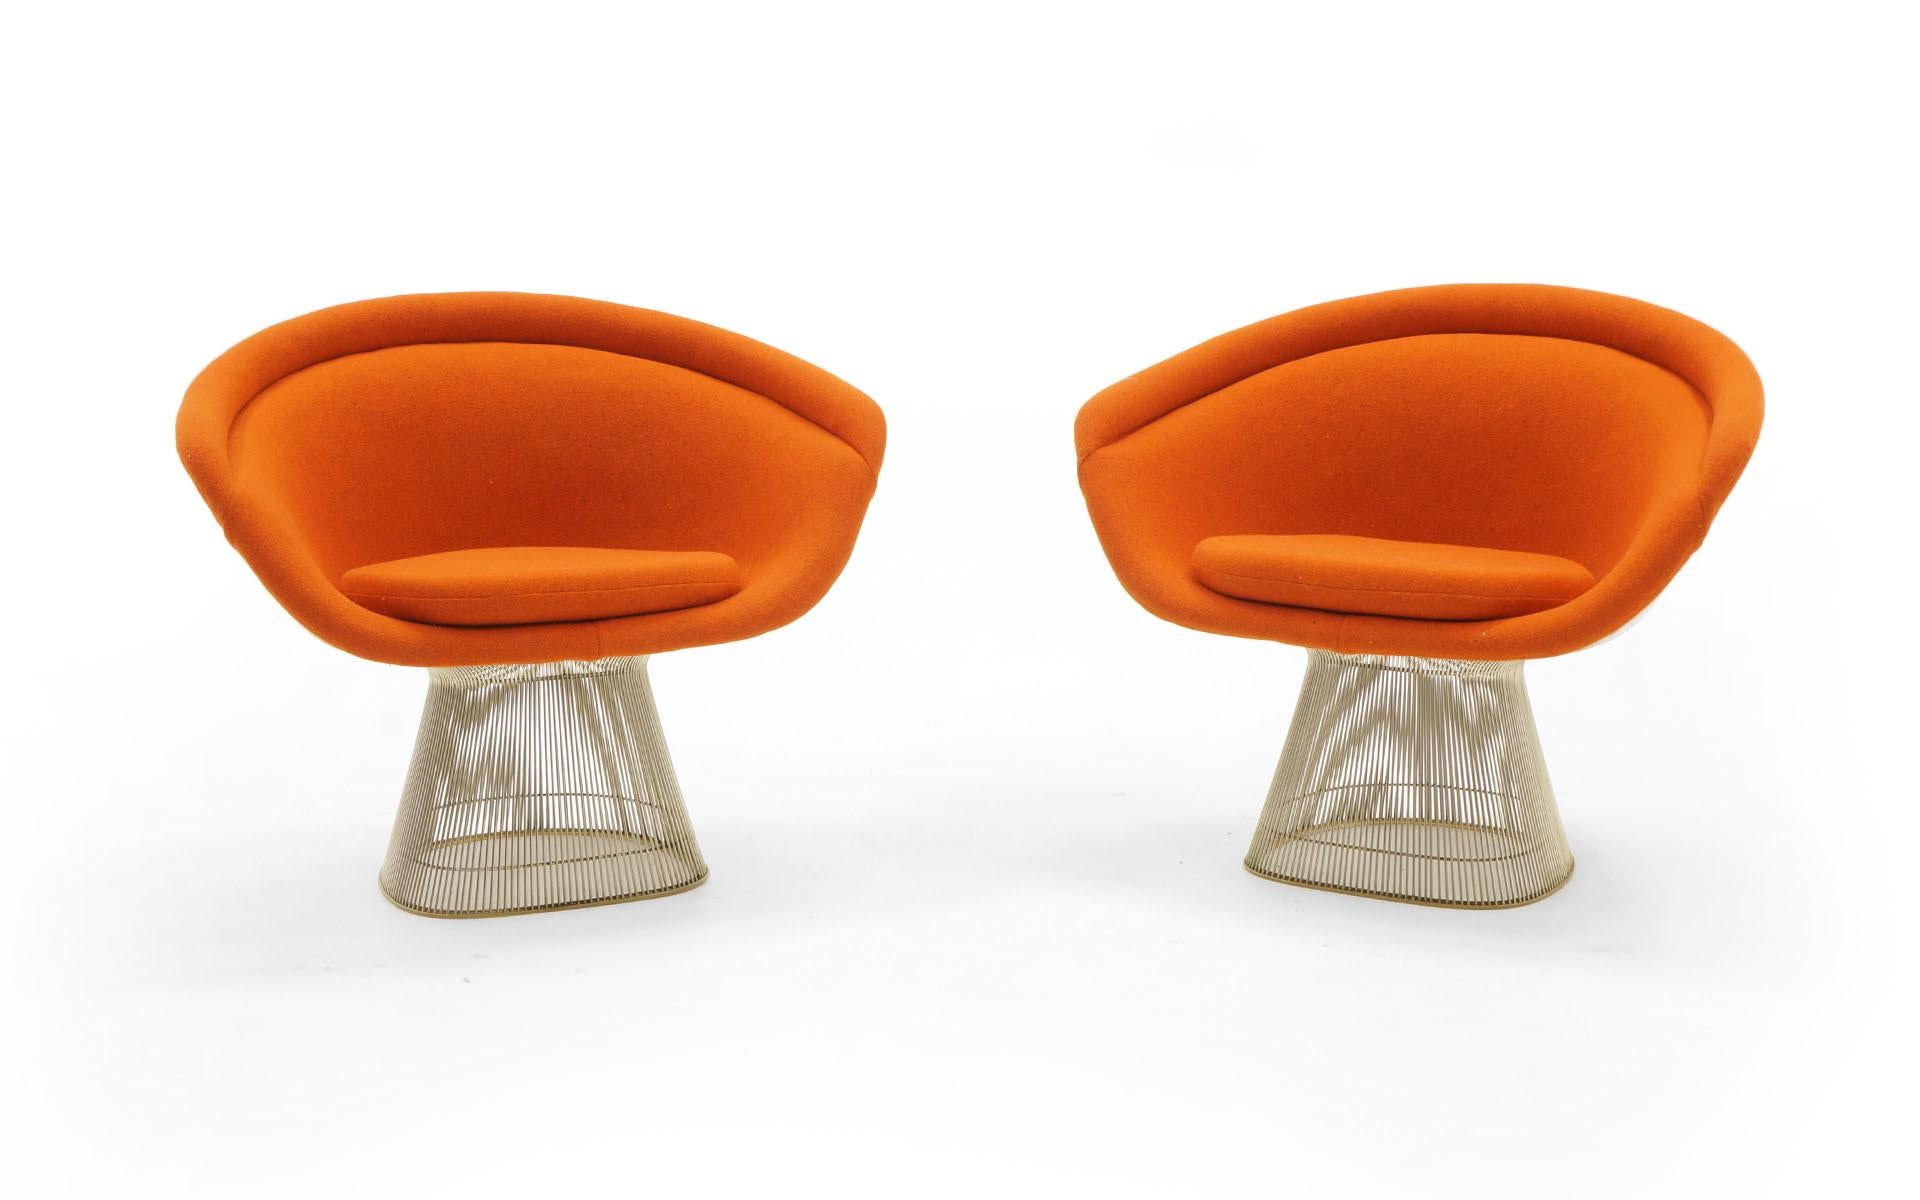 Pair of lounge chairs designed by Warren Platner. These are very early production and expertly restored and reupholstered in Maharam Redhead soft wool fabric. A stunning set.